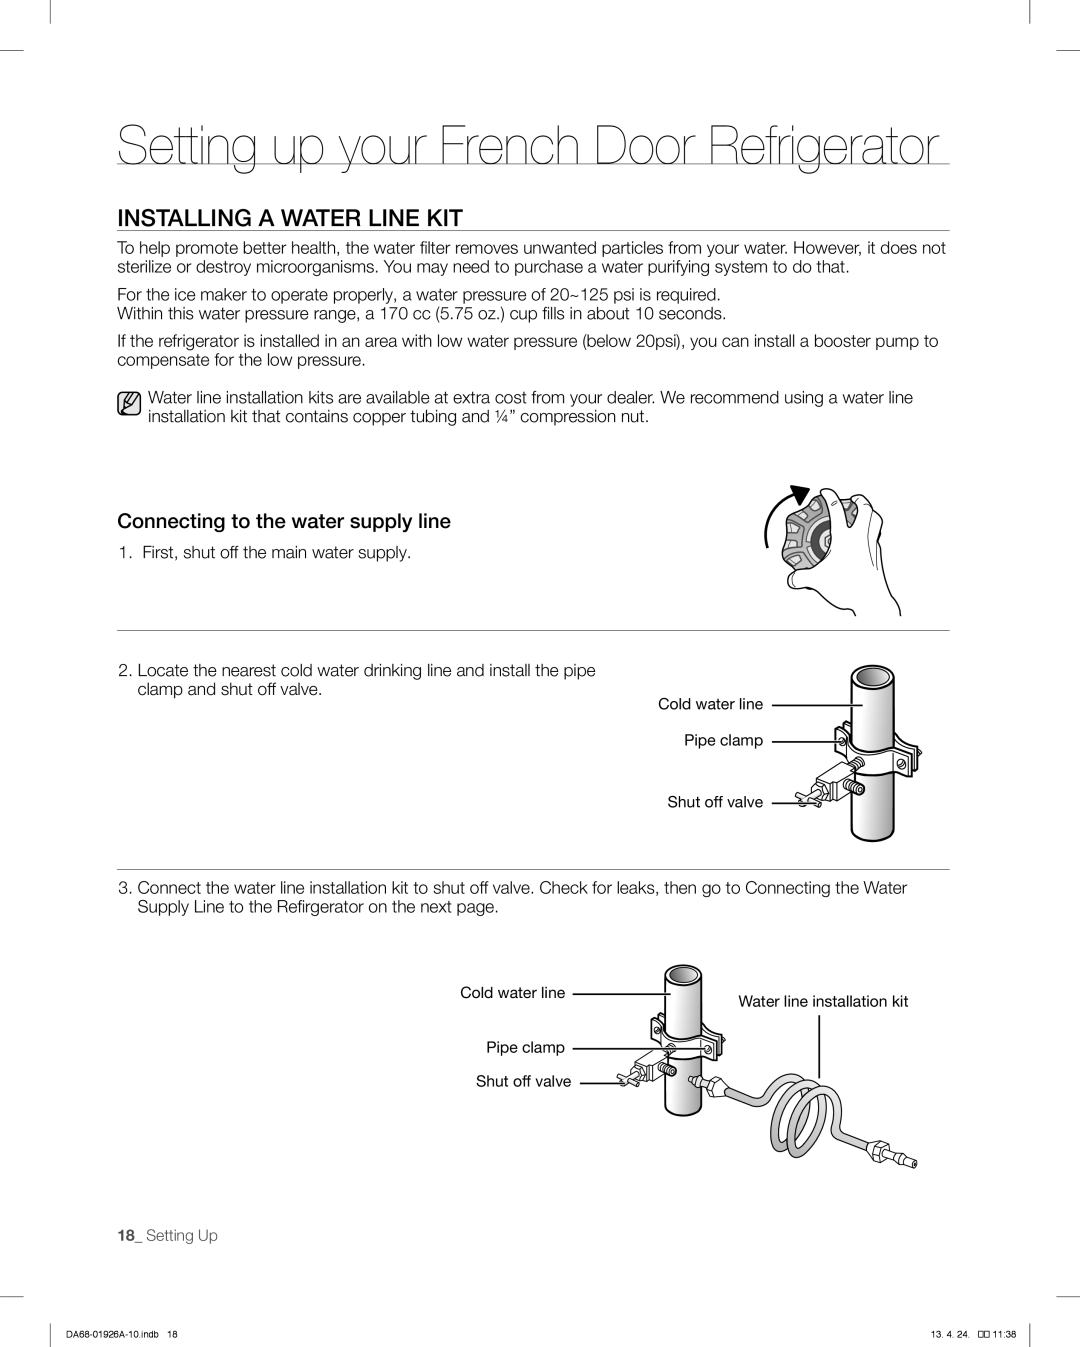 Samsung RFG293HARS, RFG293HAWP user manual Installing A Water Line Kit, Setting up your French Door Refrigerator 